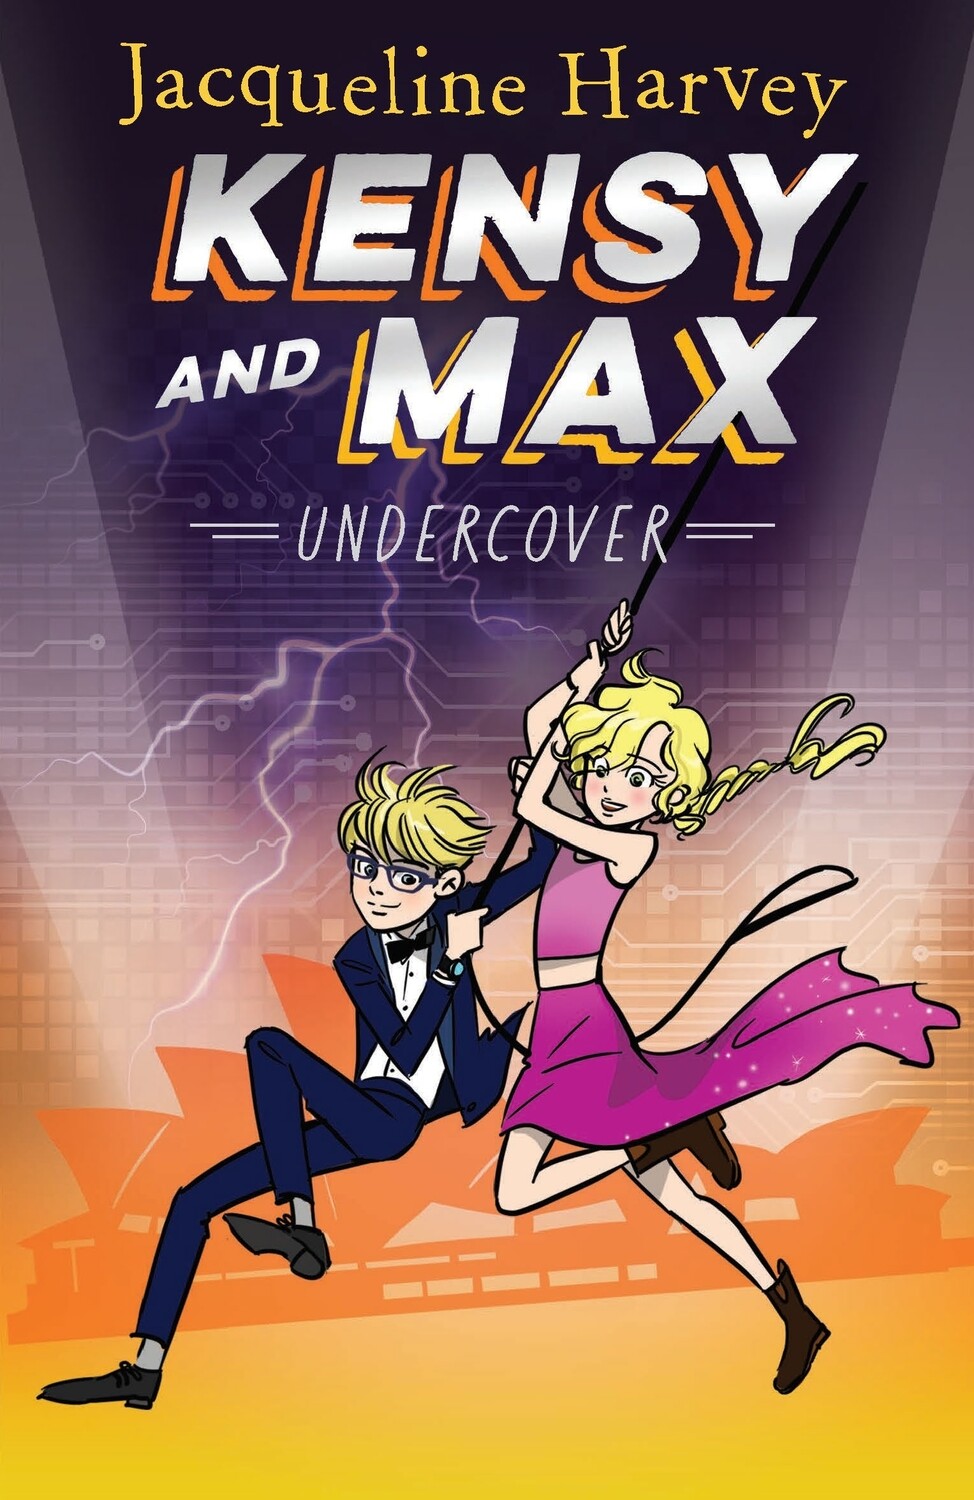 Kensy and Max: Undercover